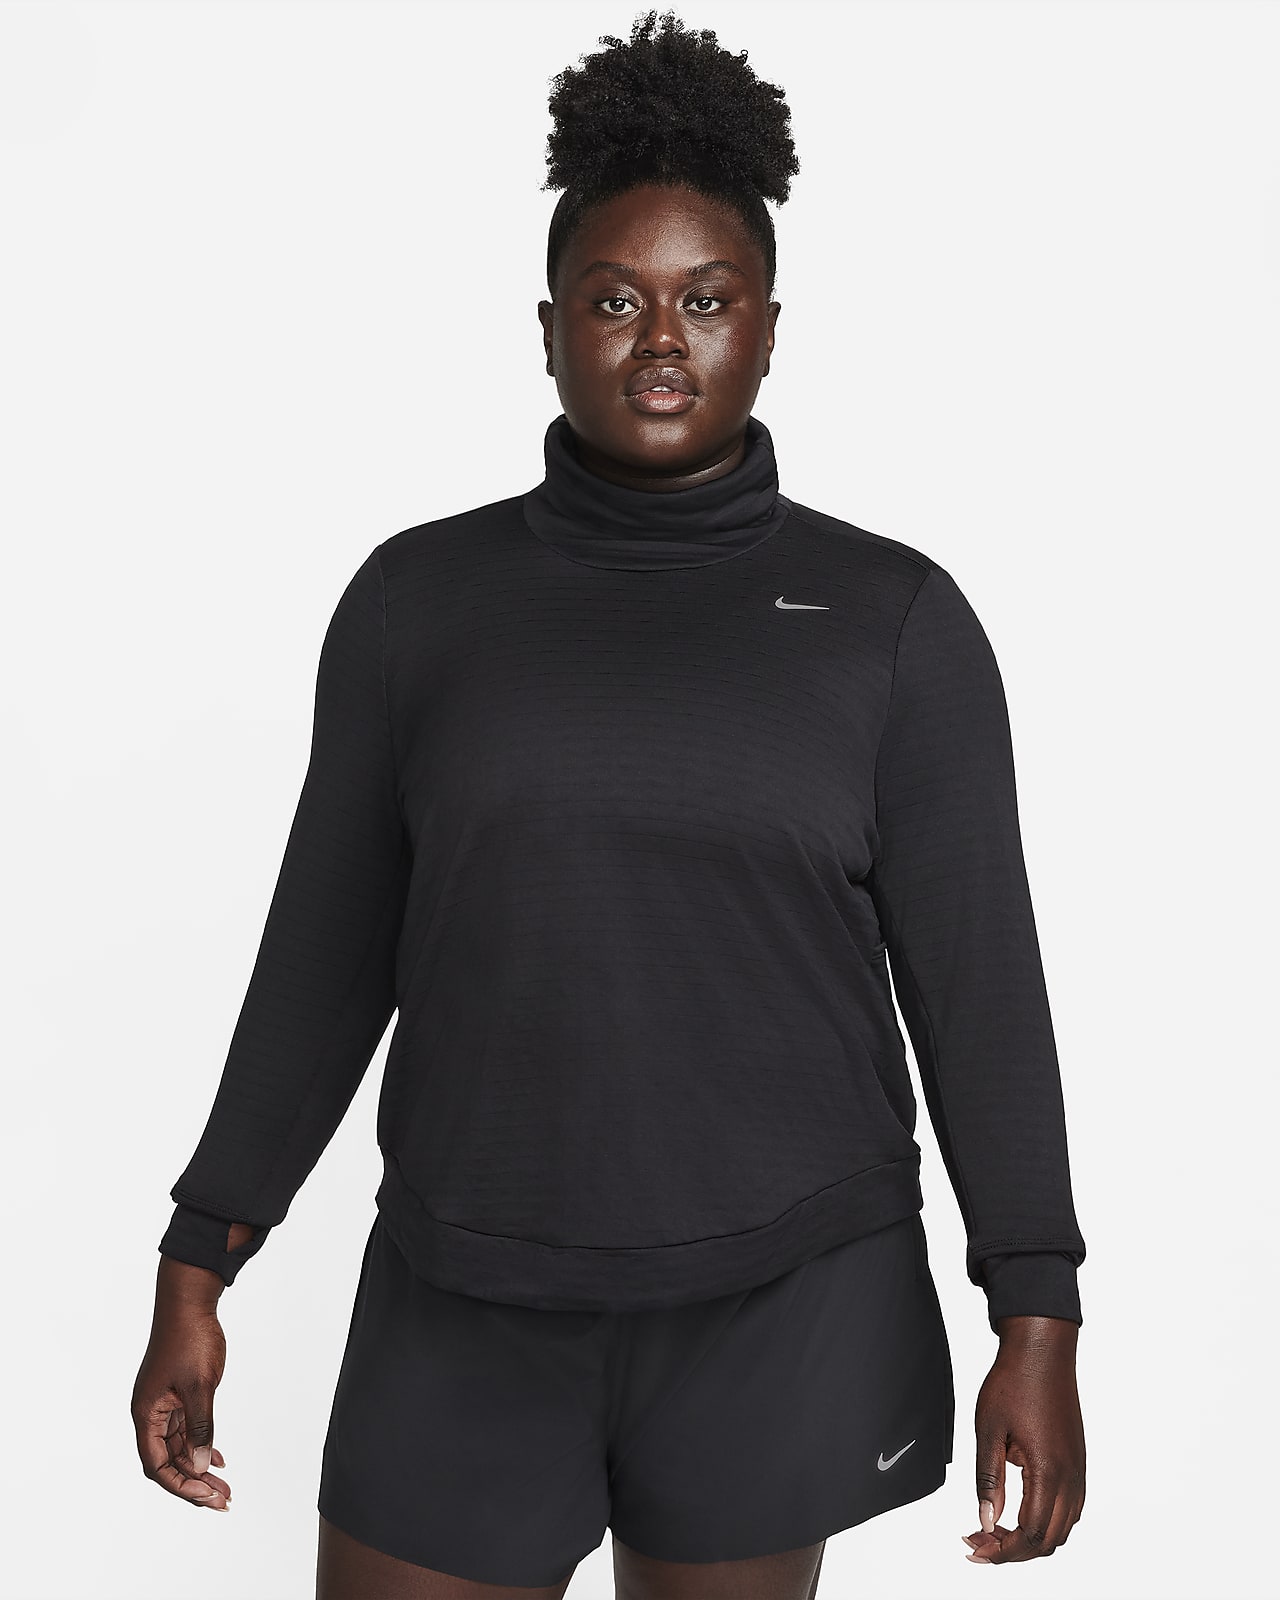 Nike Therma-FIT Swift Element Women's Turtleneck Running Top (Plus Size).